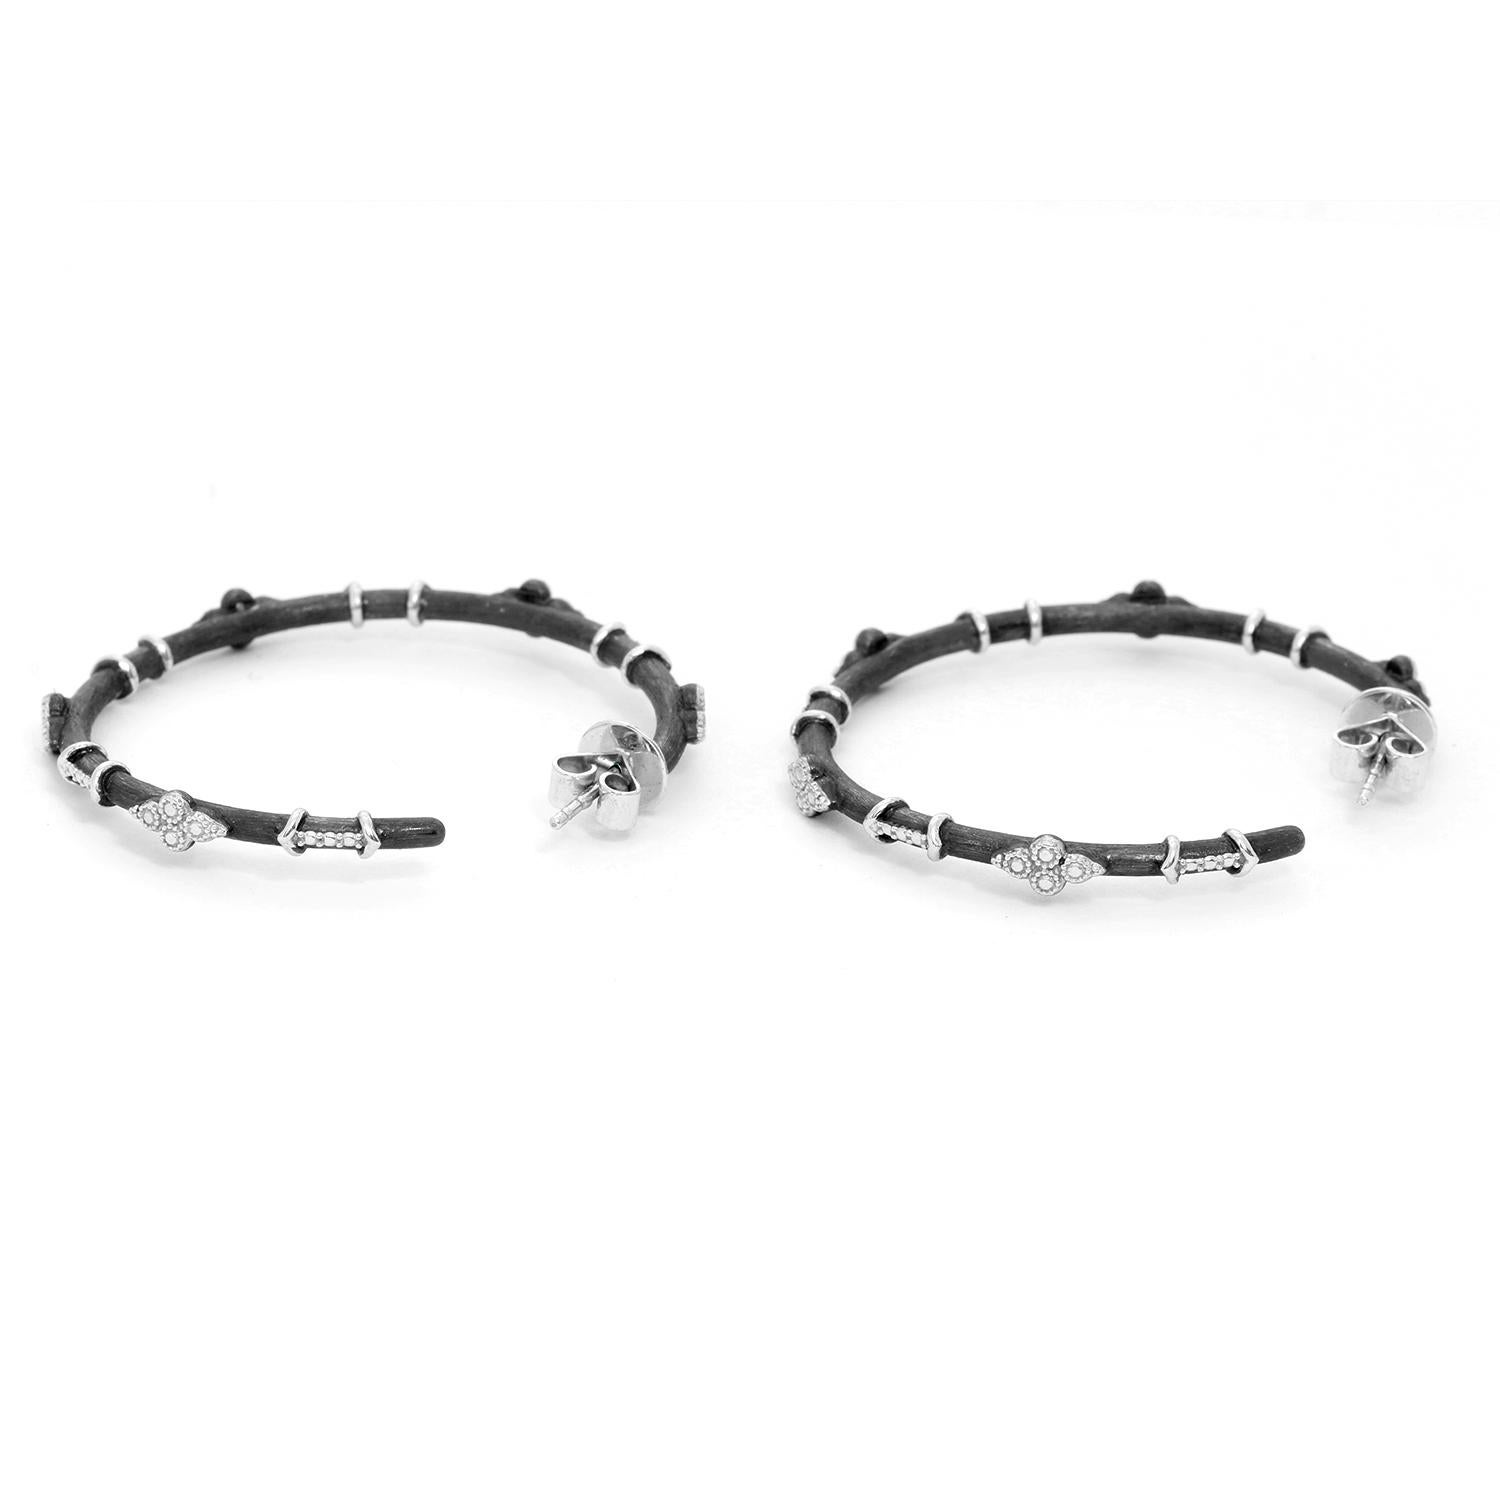 Jude Frances Silver Large Hoop Earrings - . Silver Large Moroccan hoop earrings featuring White Topaz set in sterling silver brushed with black rhodium. Great for every day! Diameter 2 mm . Length 40 mm.